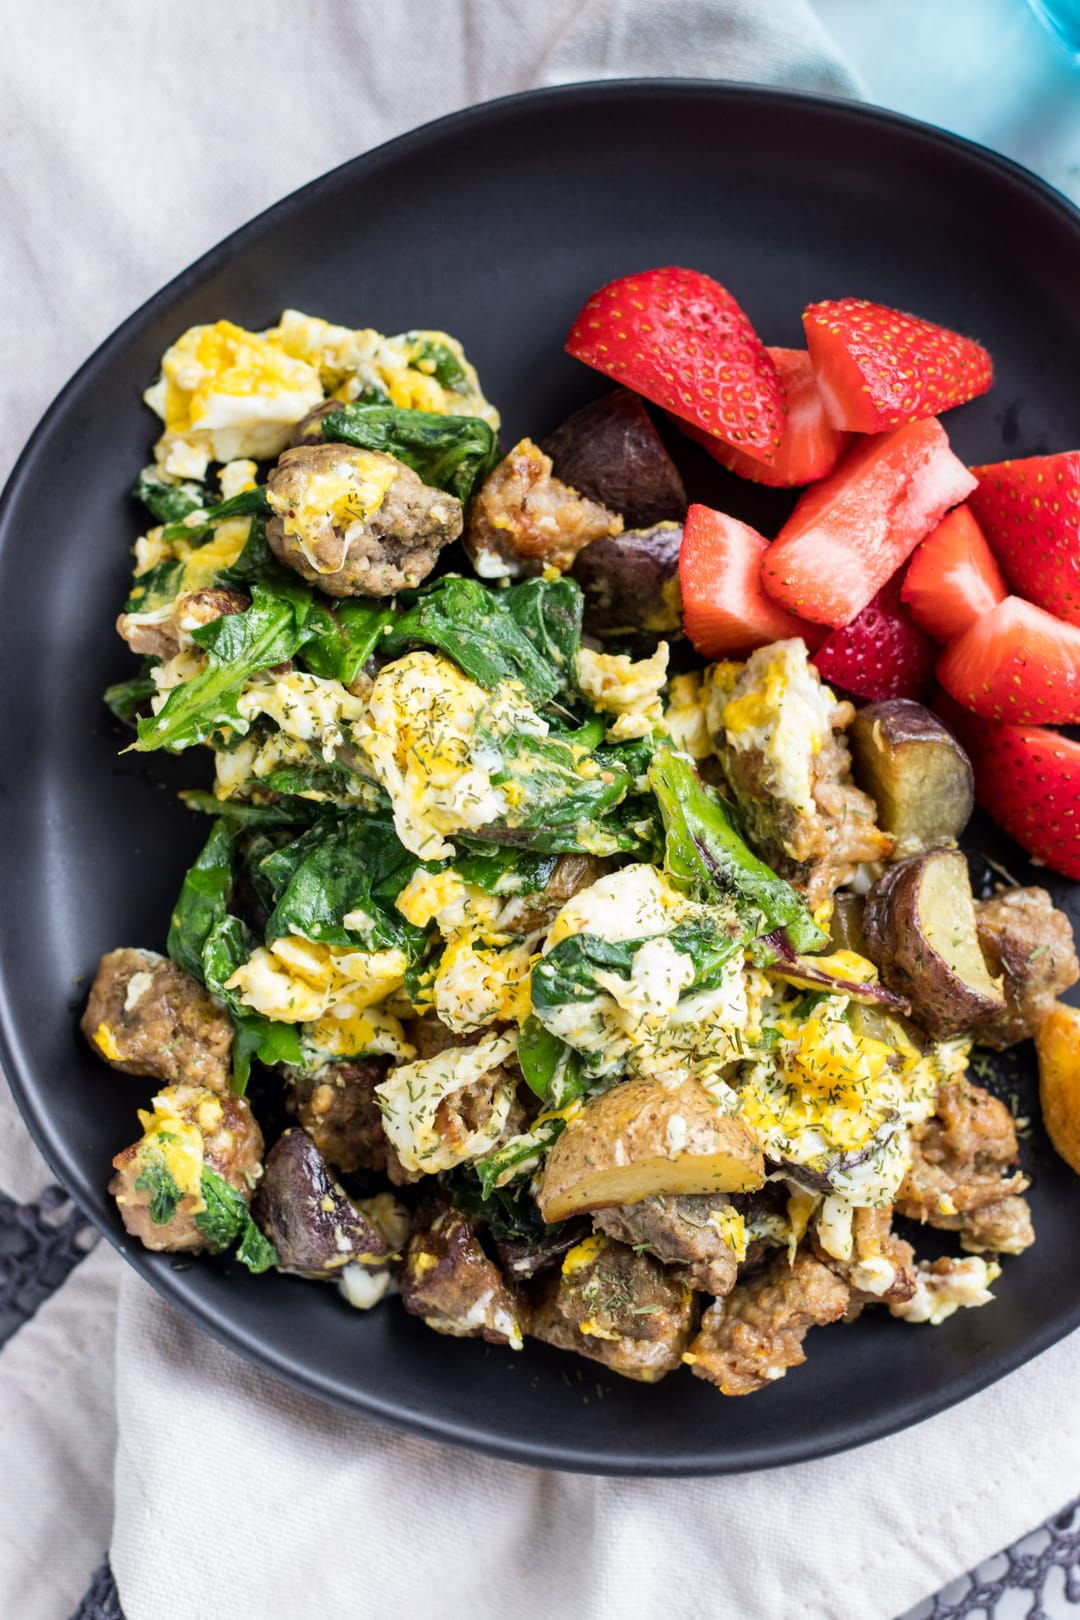 A close up of my go-to low FODMAP breakfast. It's filled with roasted potatoes, homemade sausage, eggs, and cooking greens. 